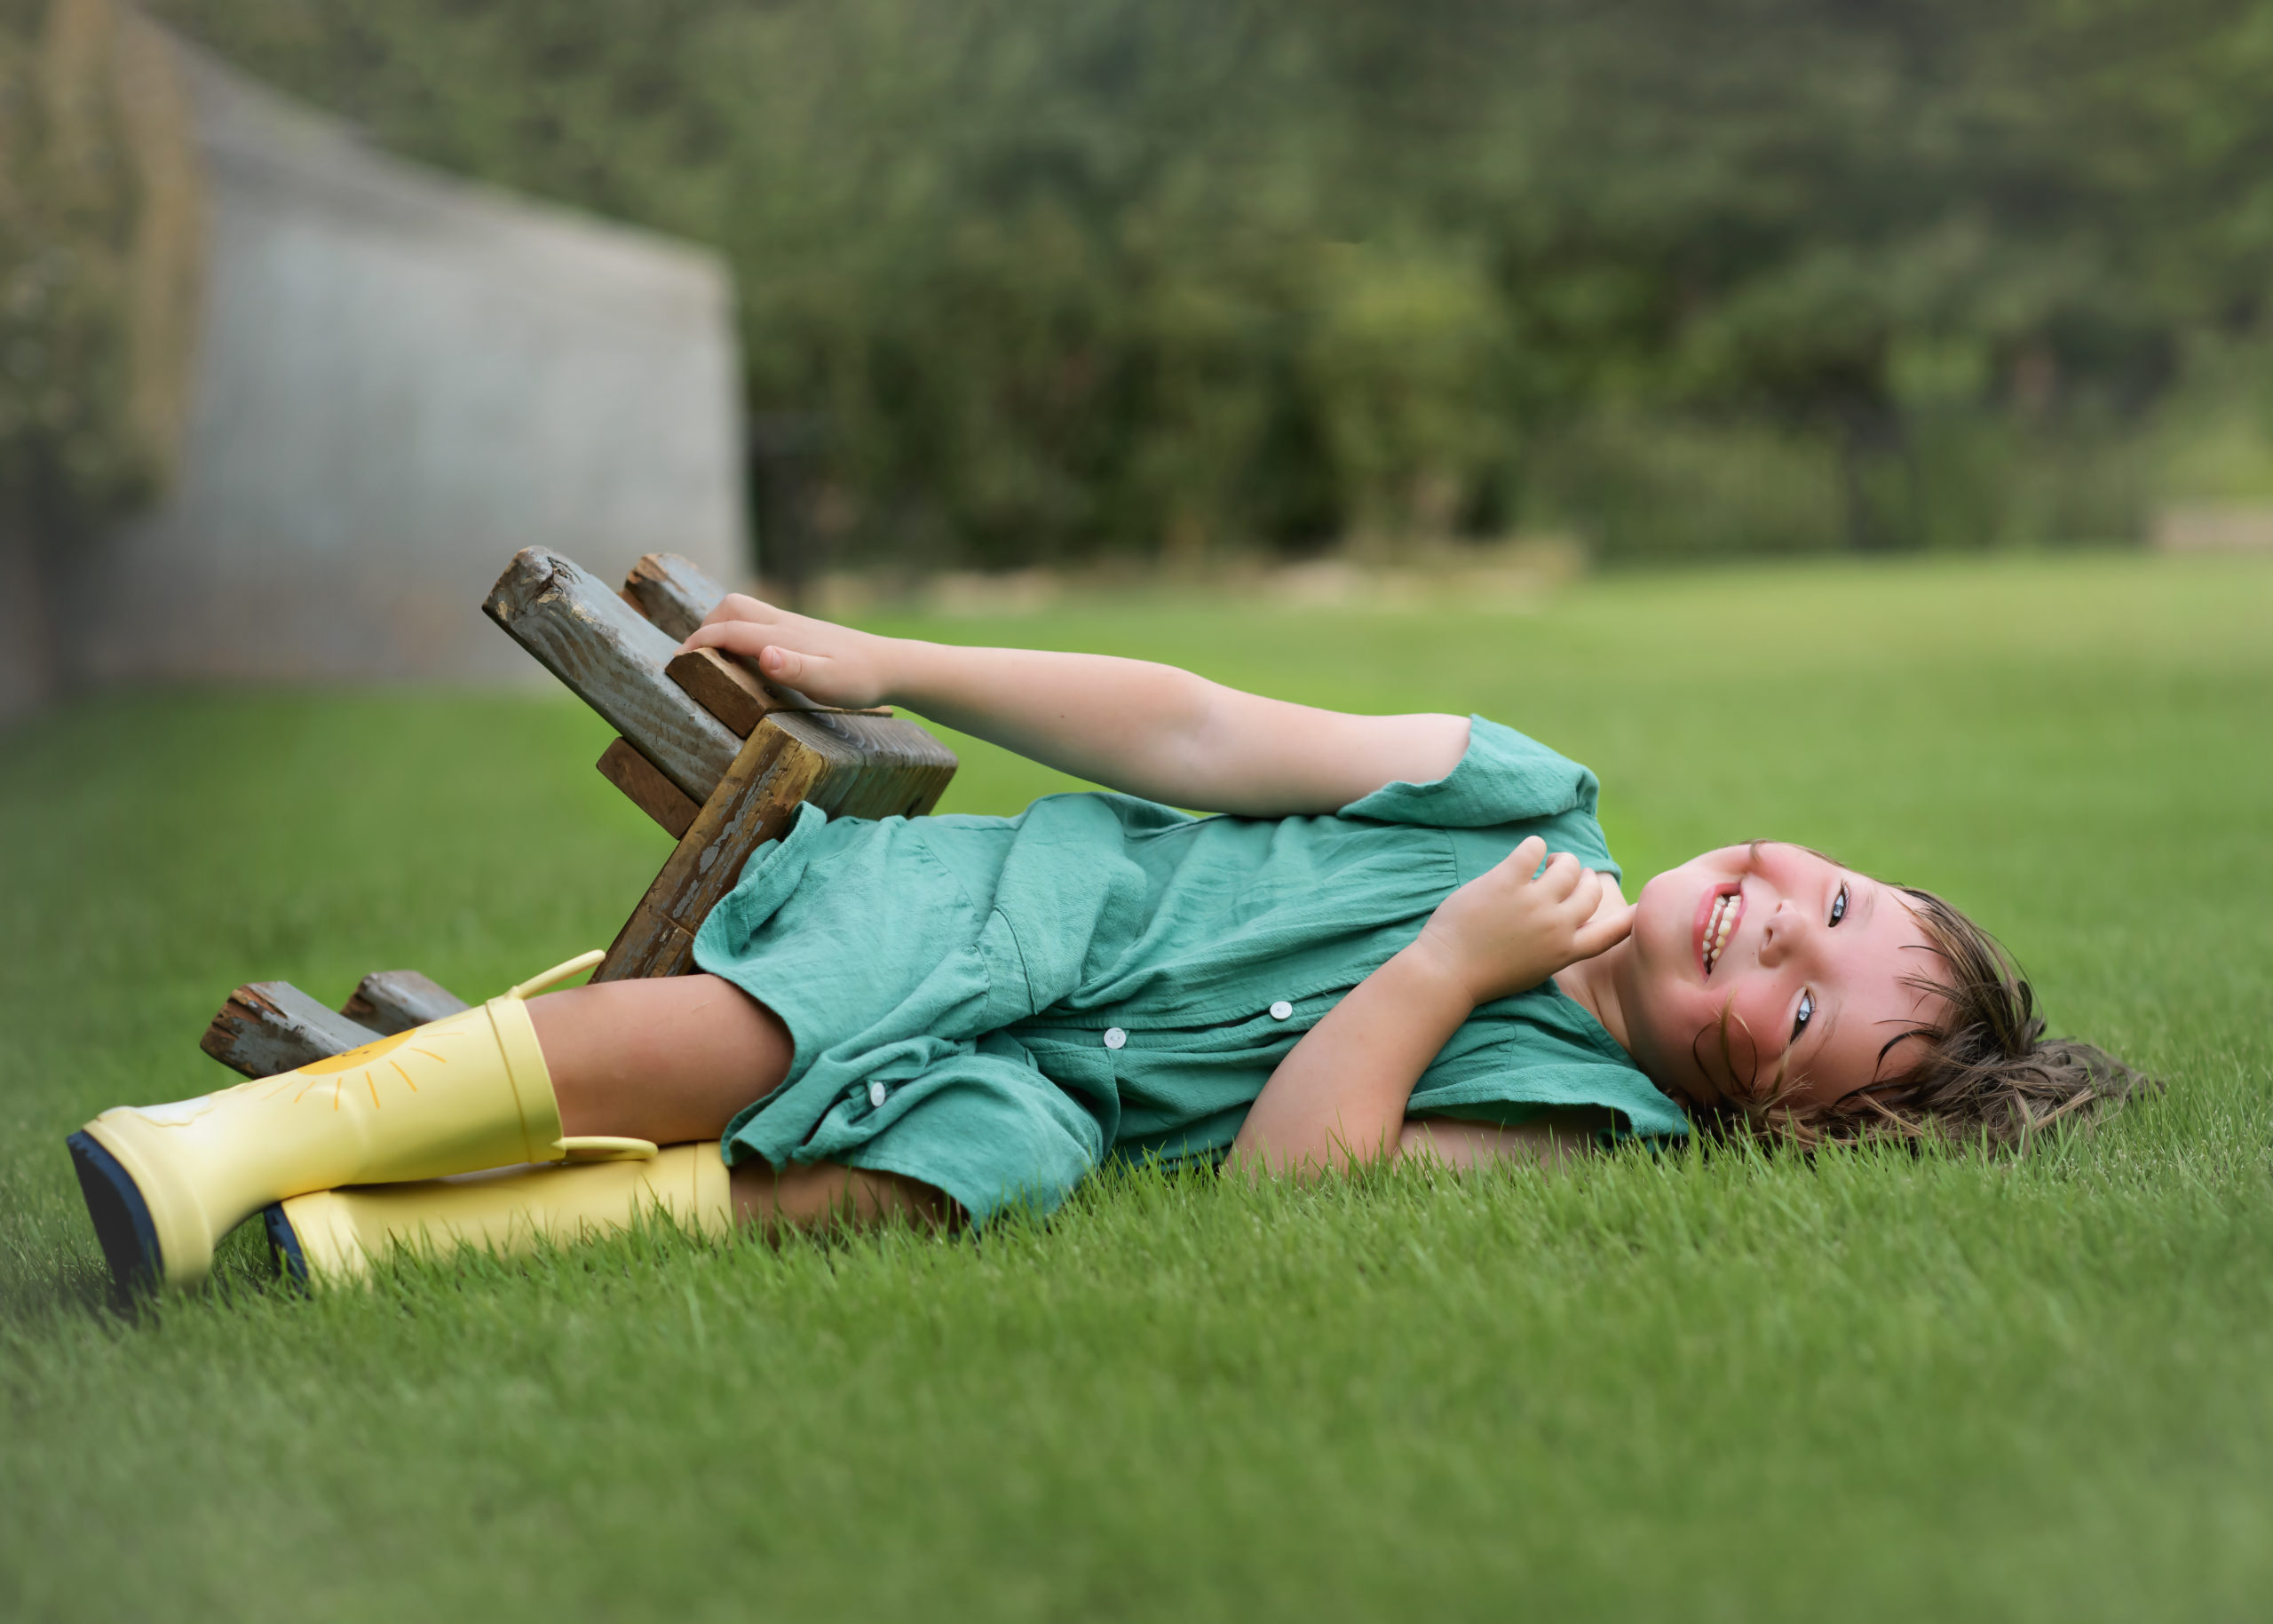 little girl in green dress and yellow rainboots laughing and laying on ground after tipping over the stool she was sitting on